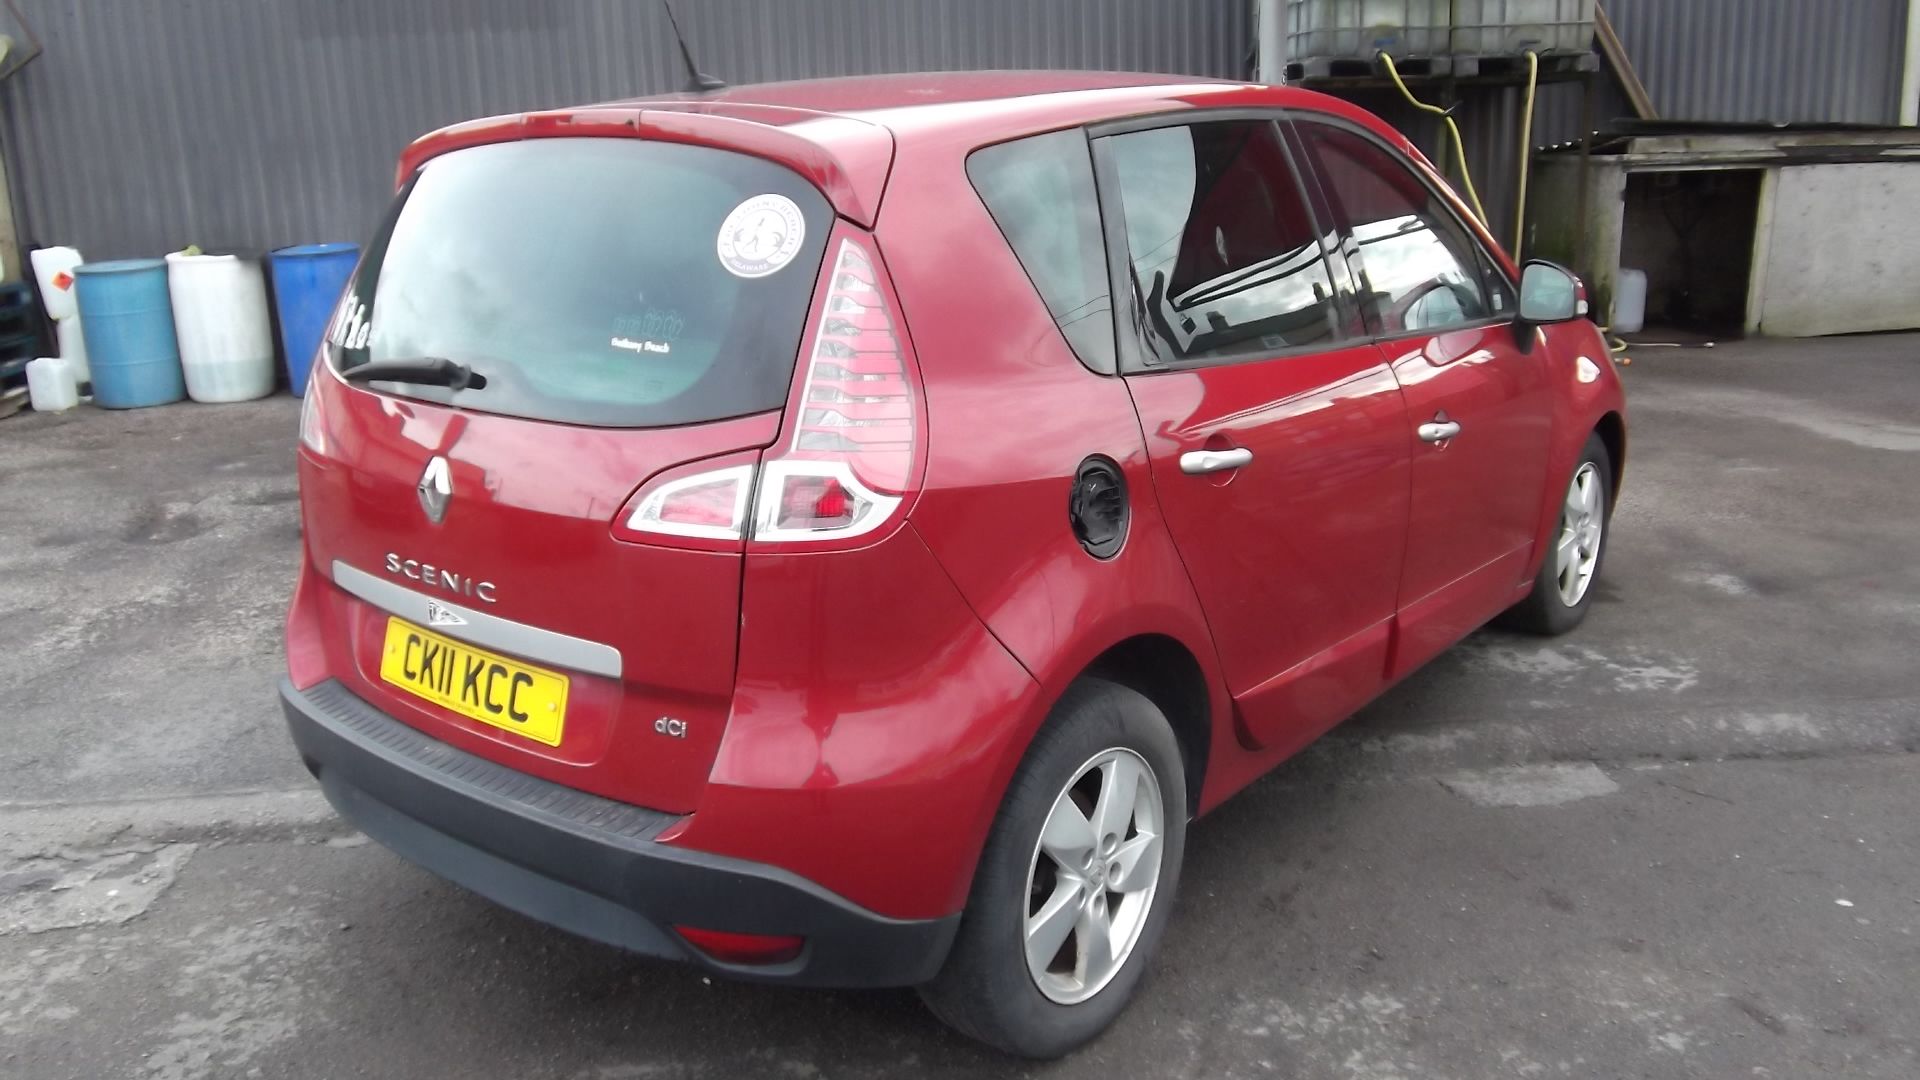 2011 Renault Scenic 1.5 DCI Dynamique Tom Tom 5 Door MPV - Image 13 of 17